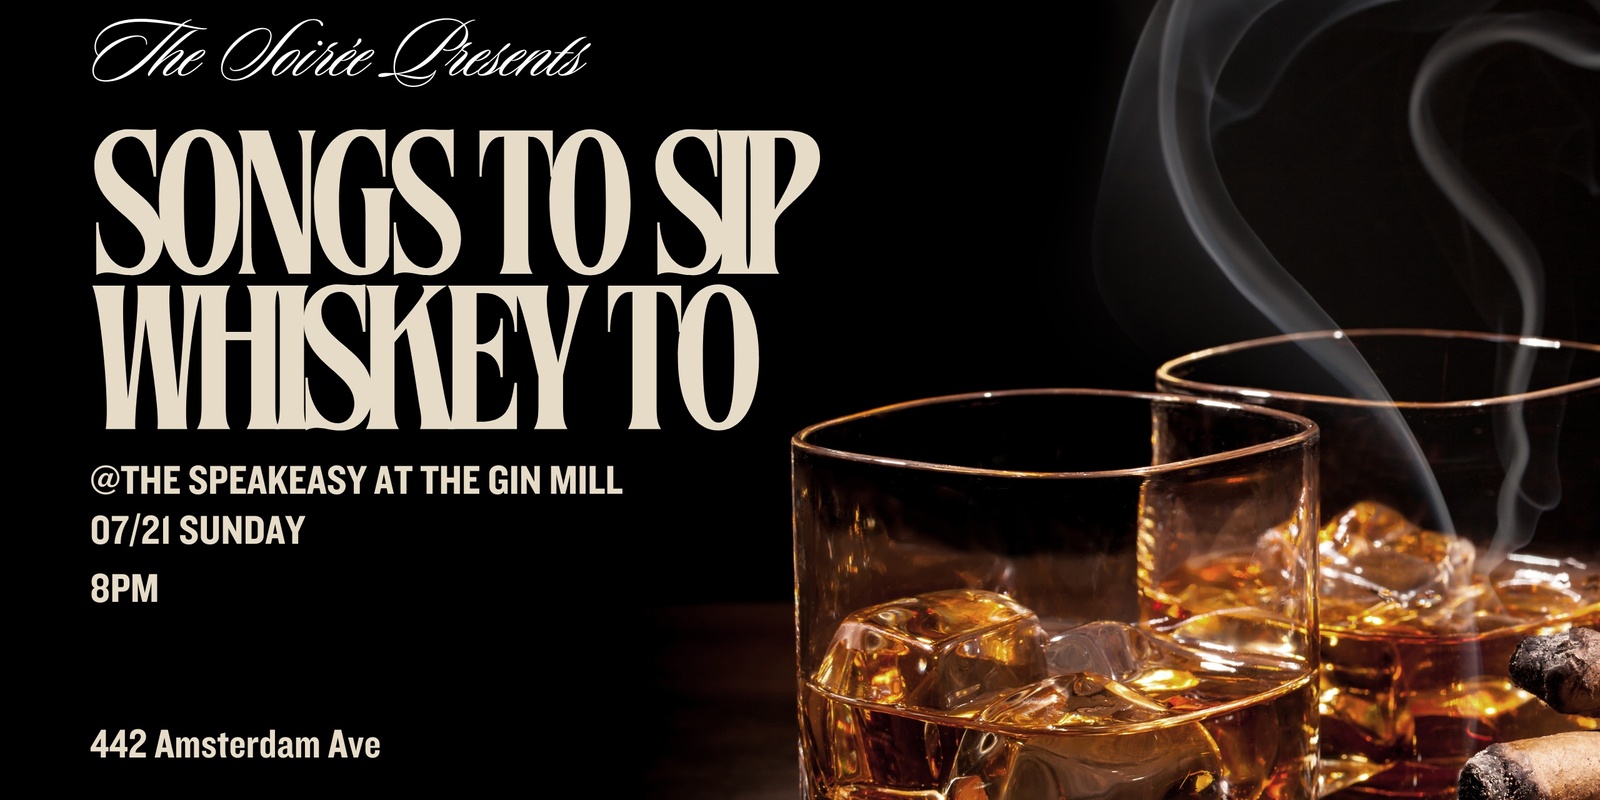 Banner image for The Soirée Presents: Songs To Sip Whiskey To